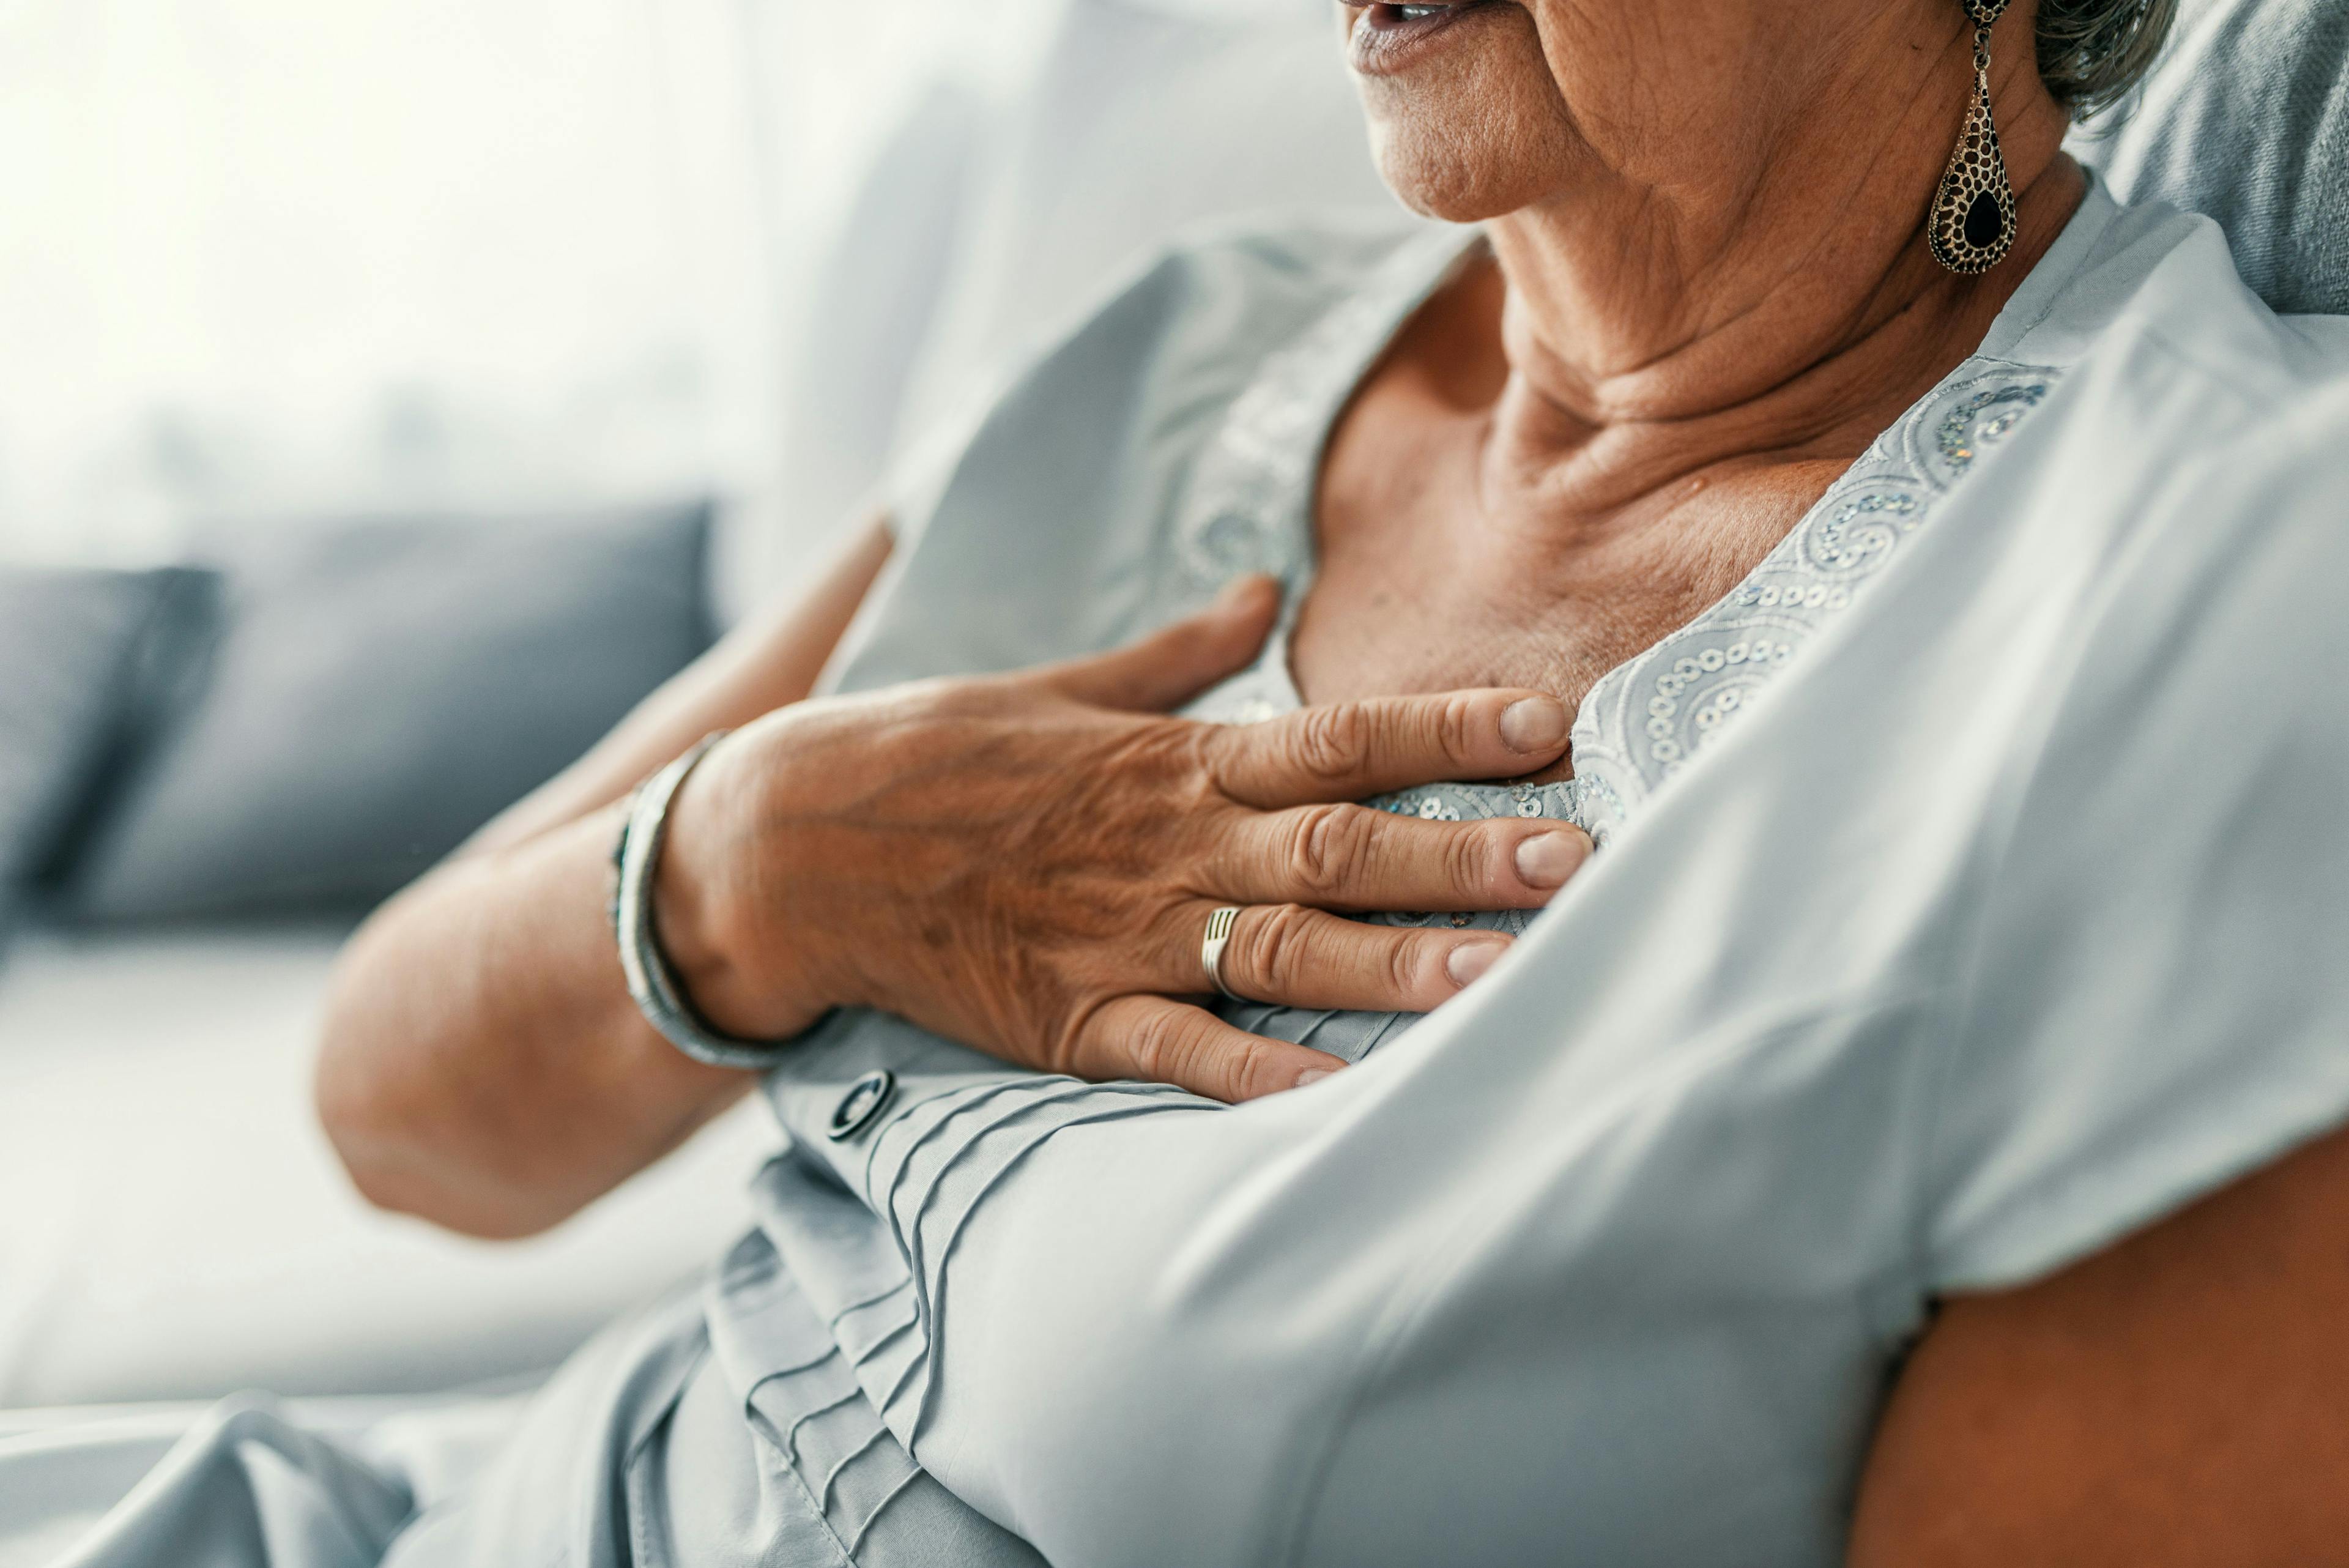 Female with chest pain | Image Credit: Dragana Gordic - stock.adobe.com